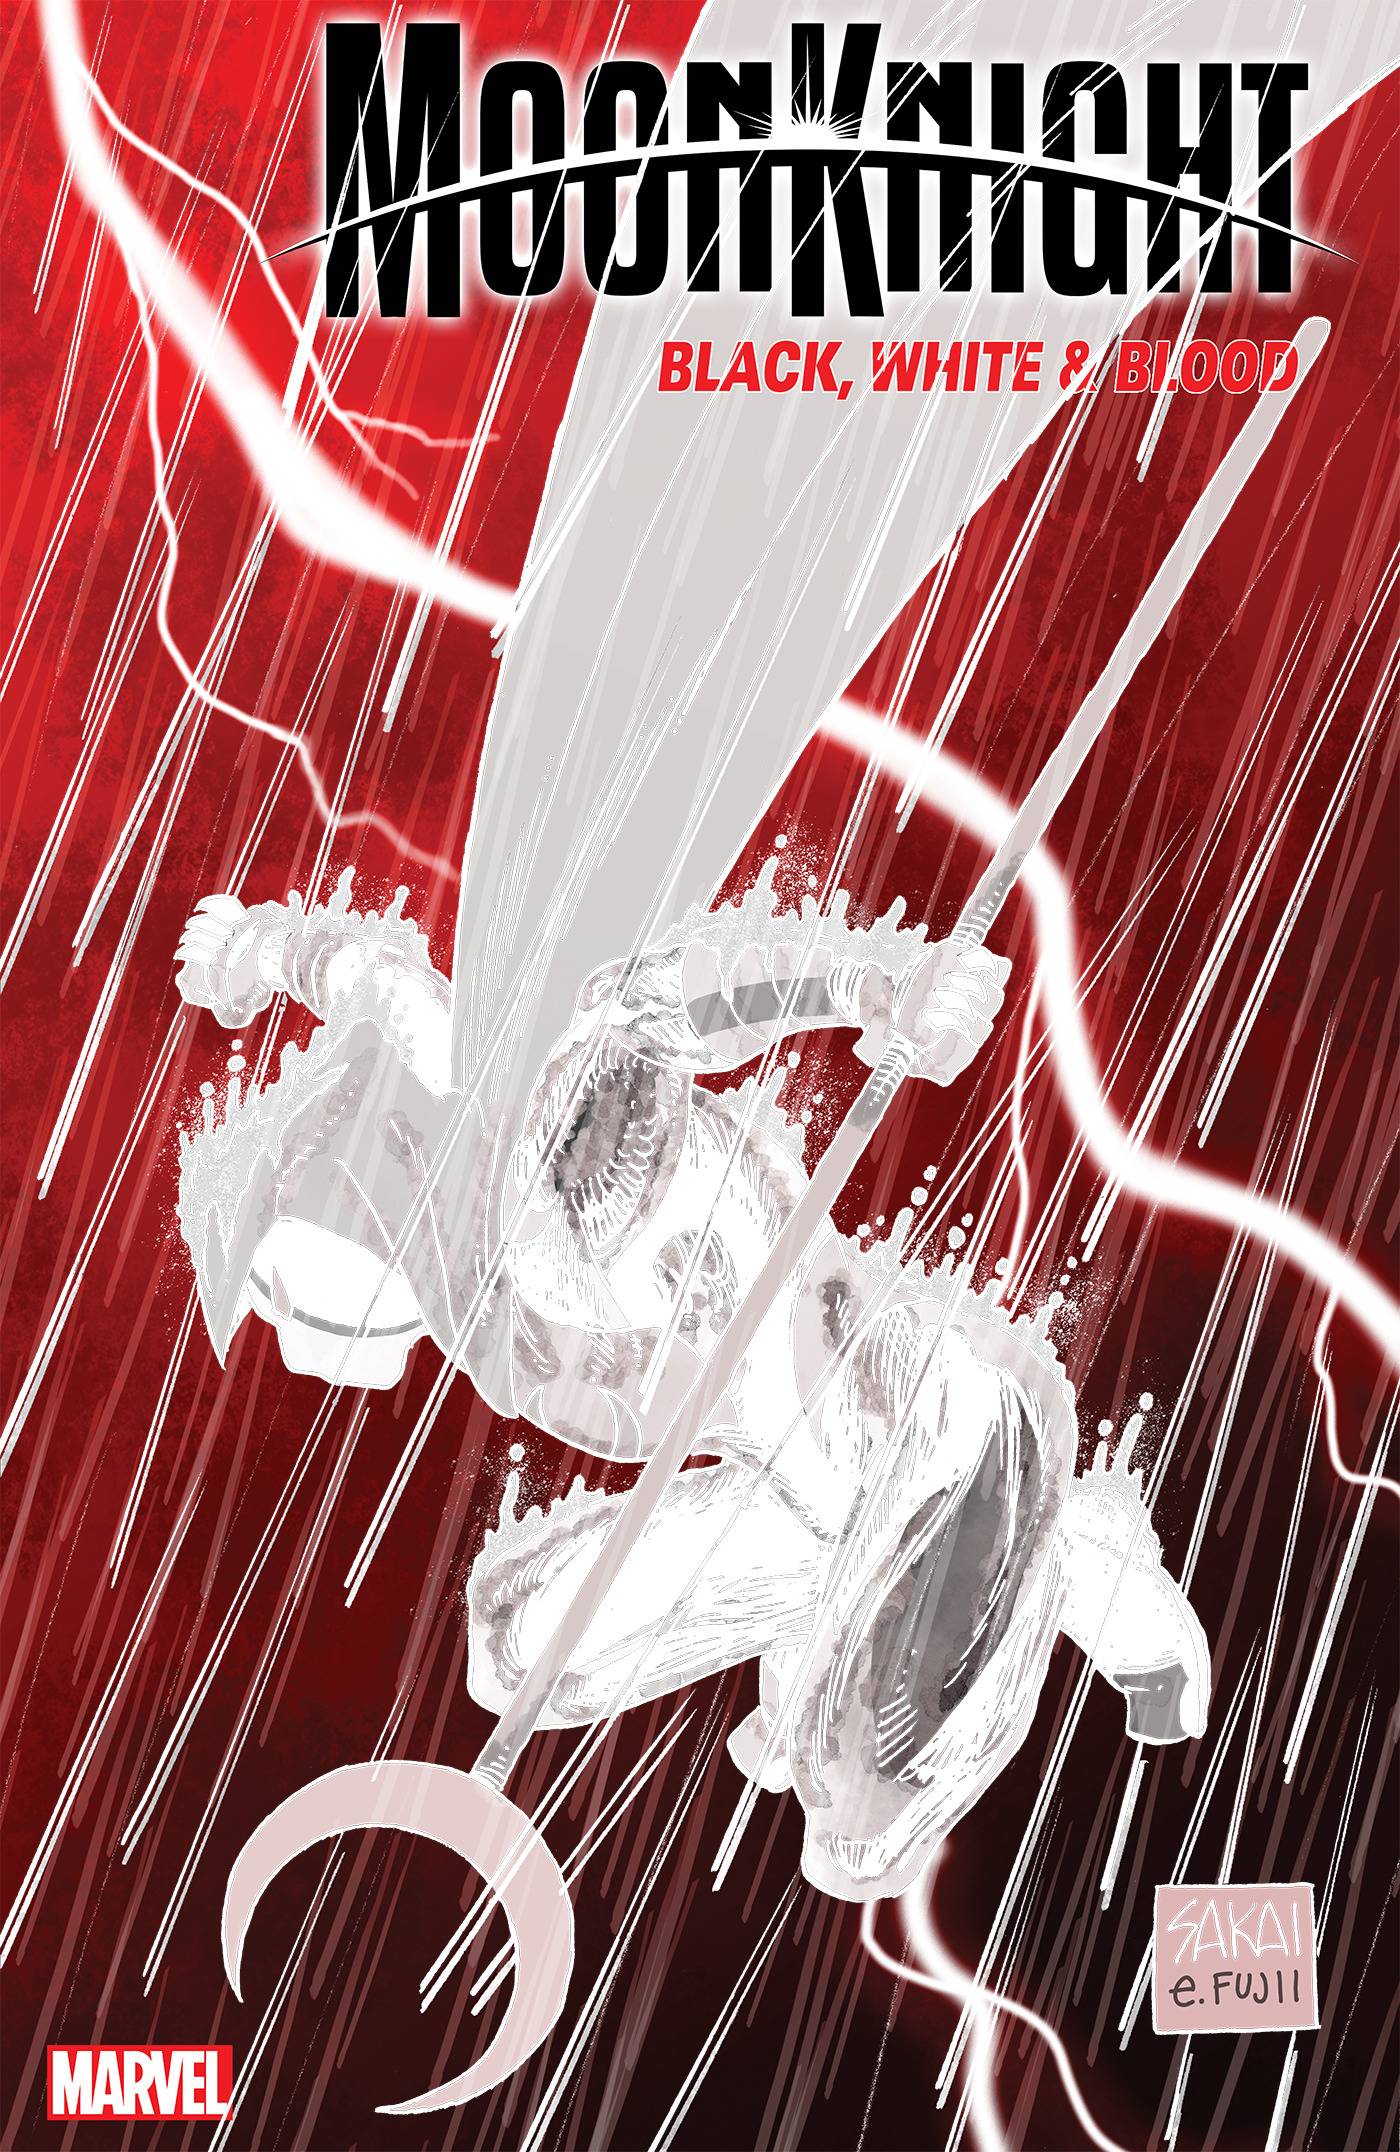 MOON KNIGHT BLACK WHITE BLOOD #1 (OF 4) 1:25 VARIANT 2022